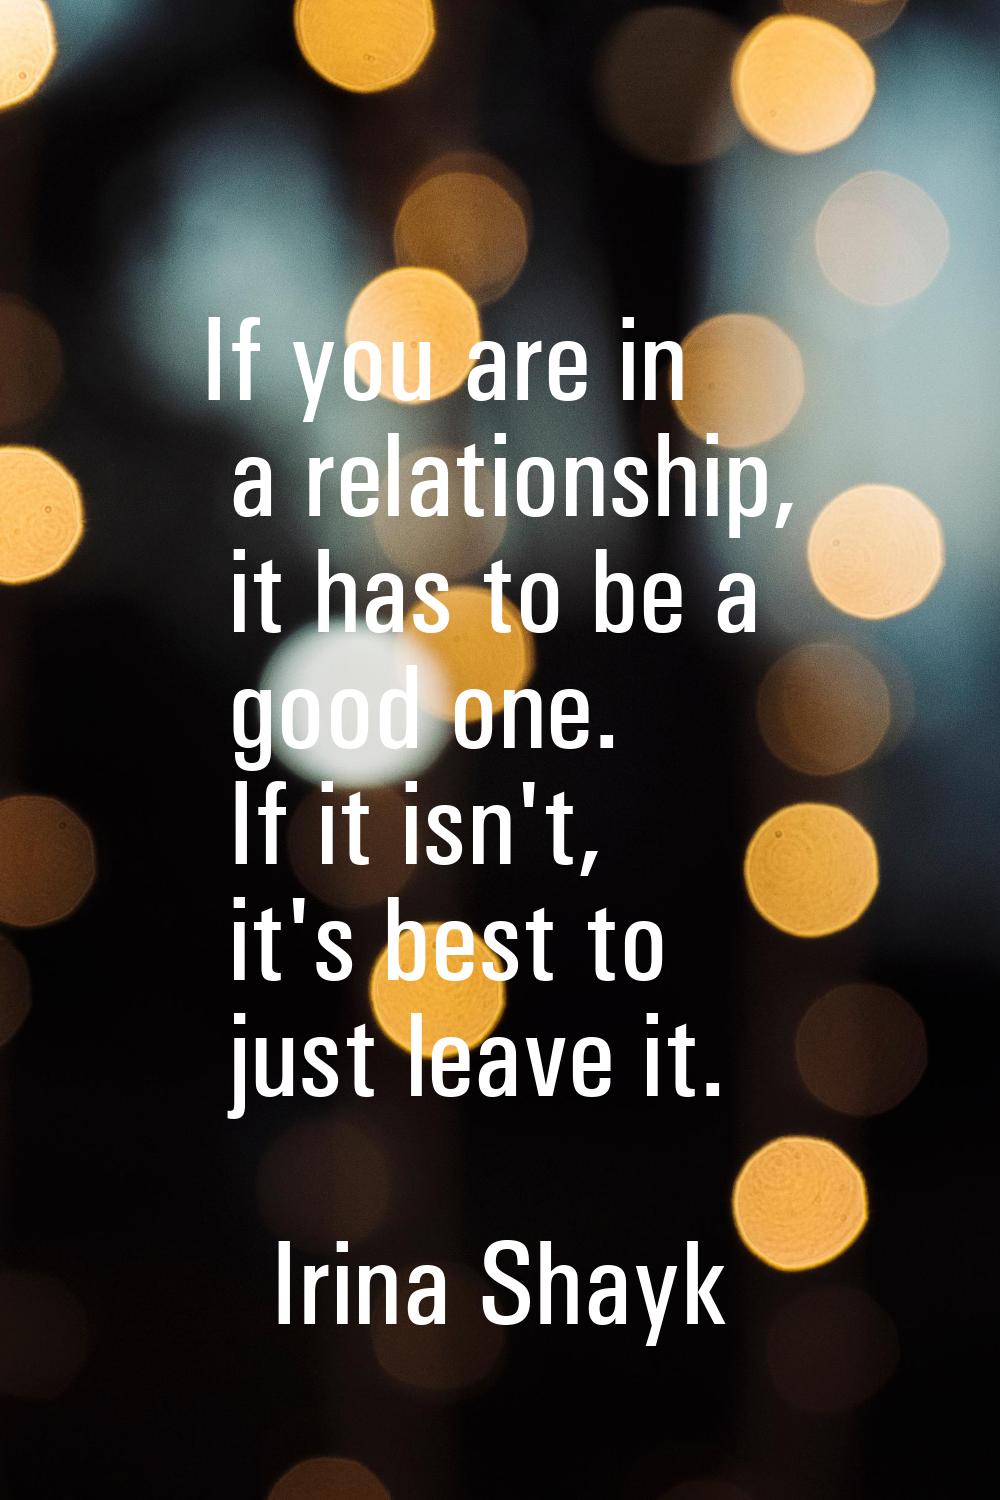 If you are in a relationship, it has to be a good one. If it isn't, it's best to just leave it.